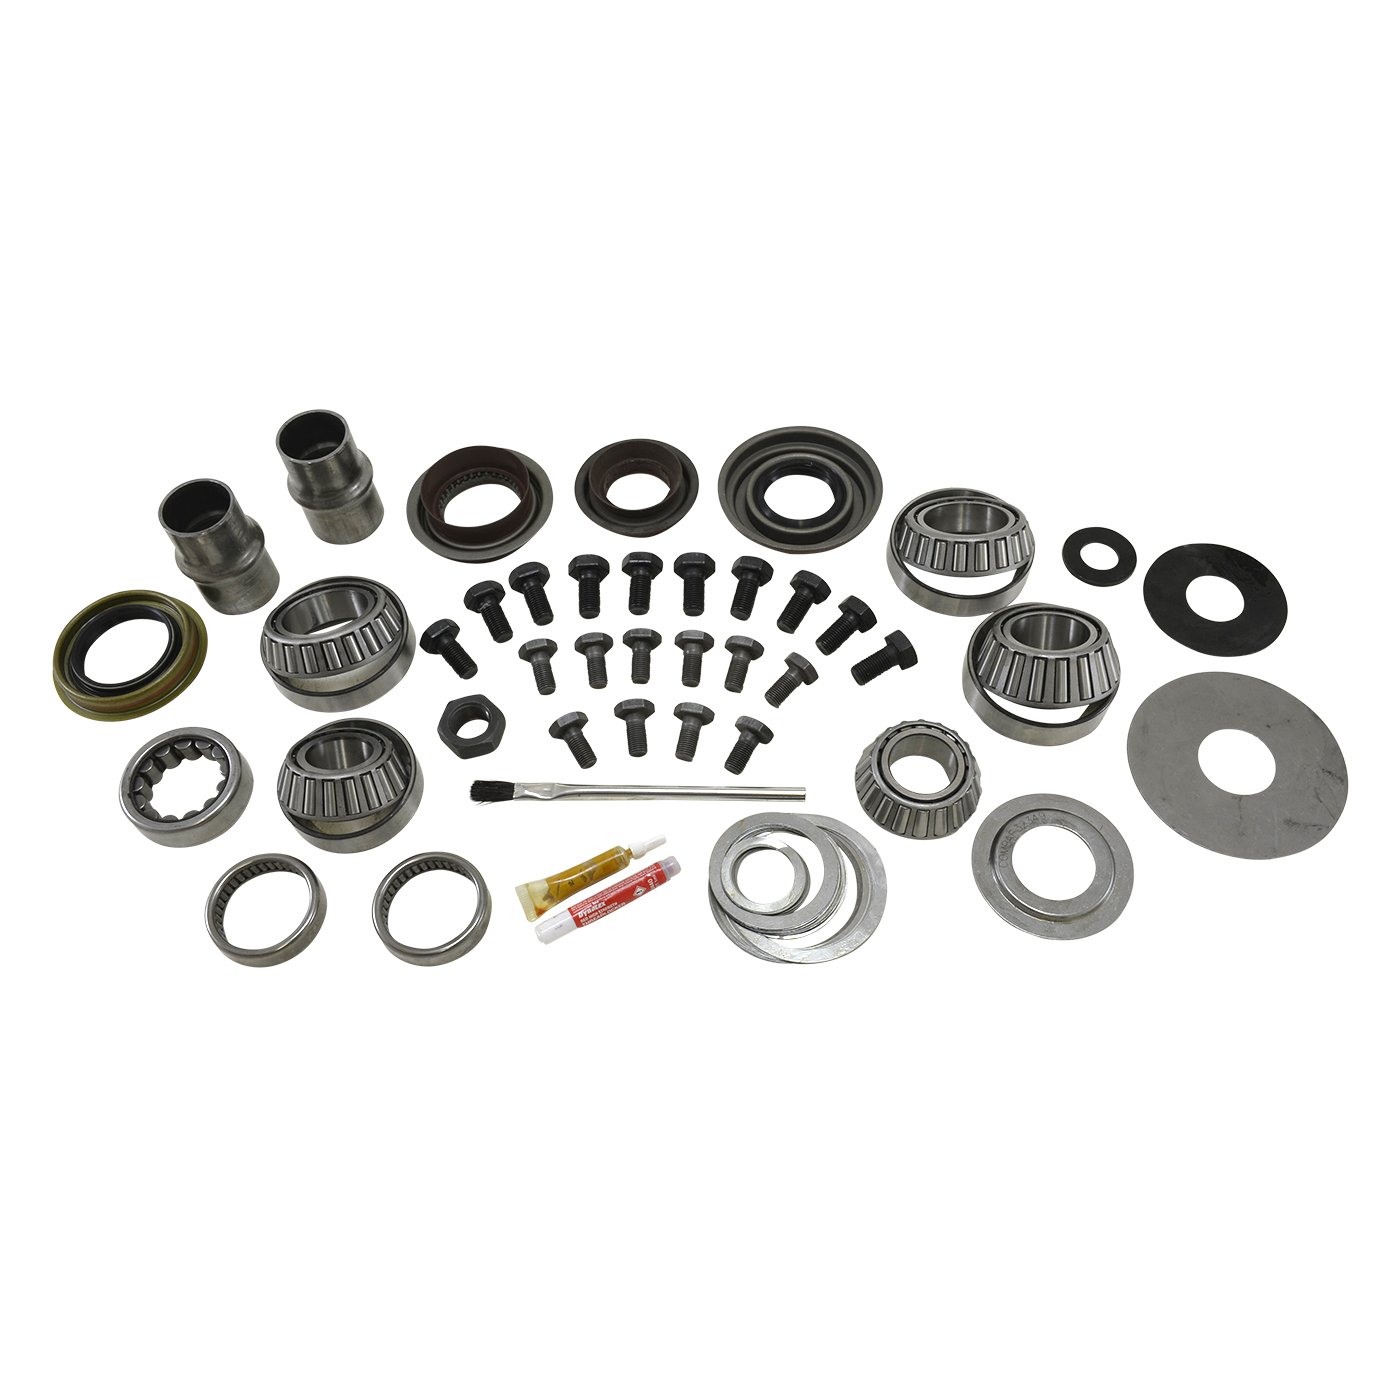 Master Overhaul Kit Jeep Liberty Dana "Super" 30 Front  Differential